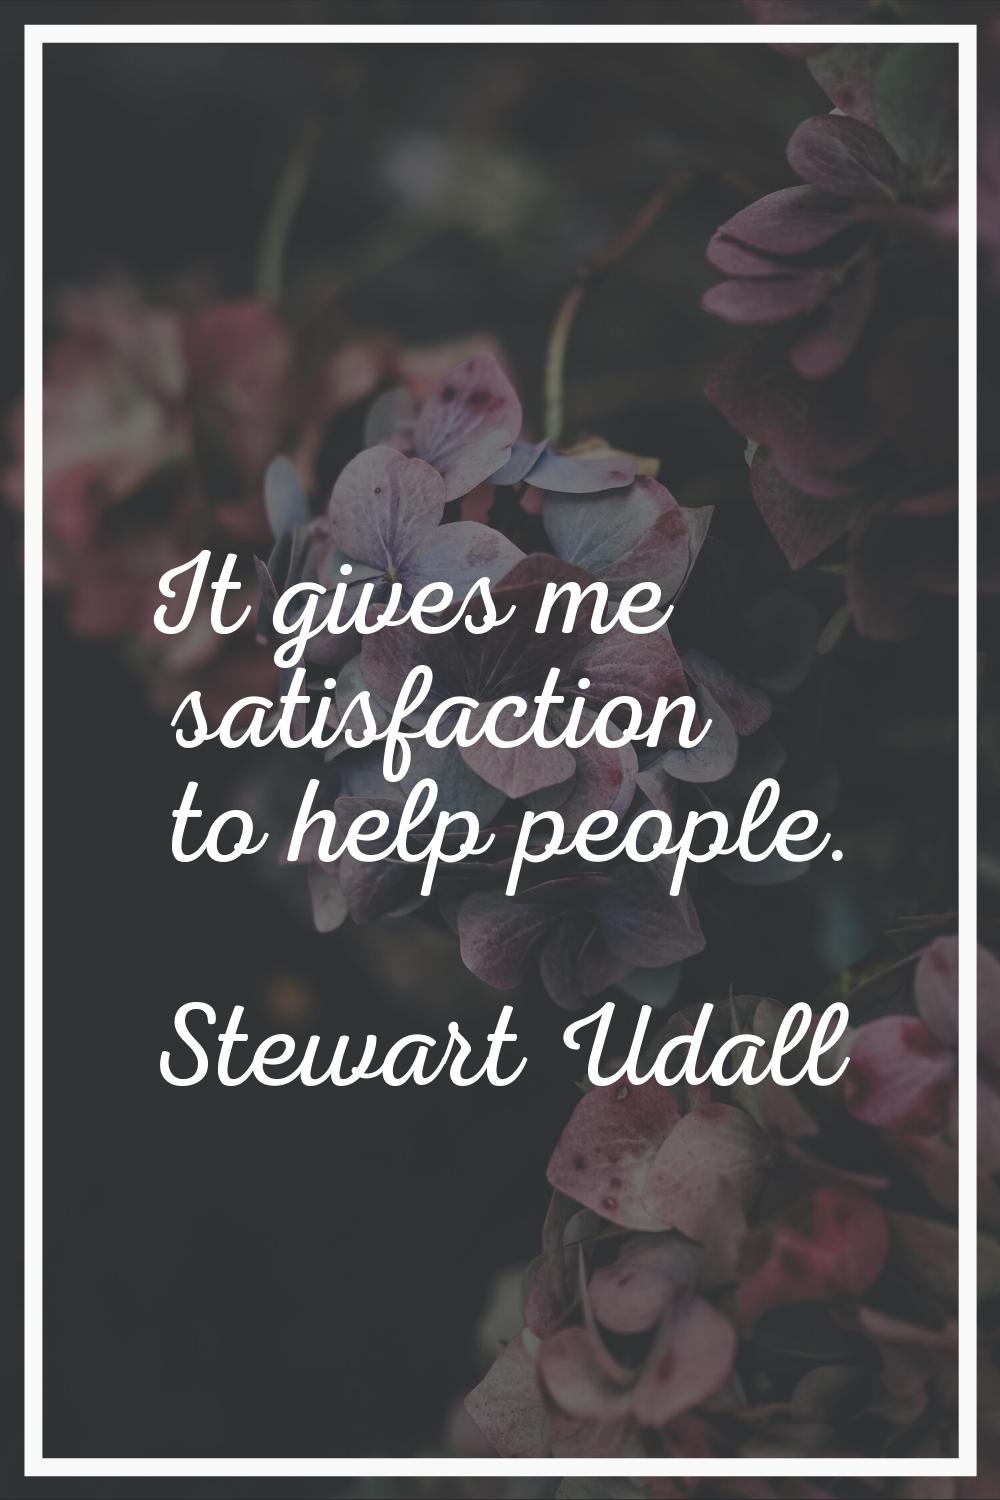 It gives me satisfaction to help people.